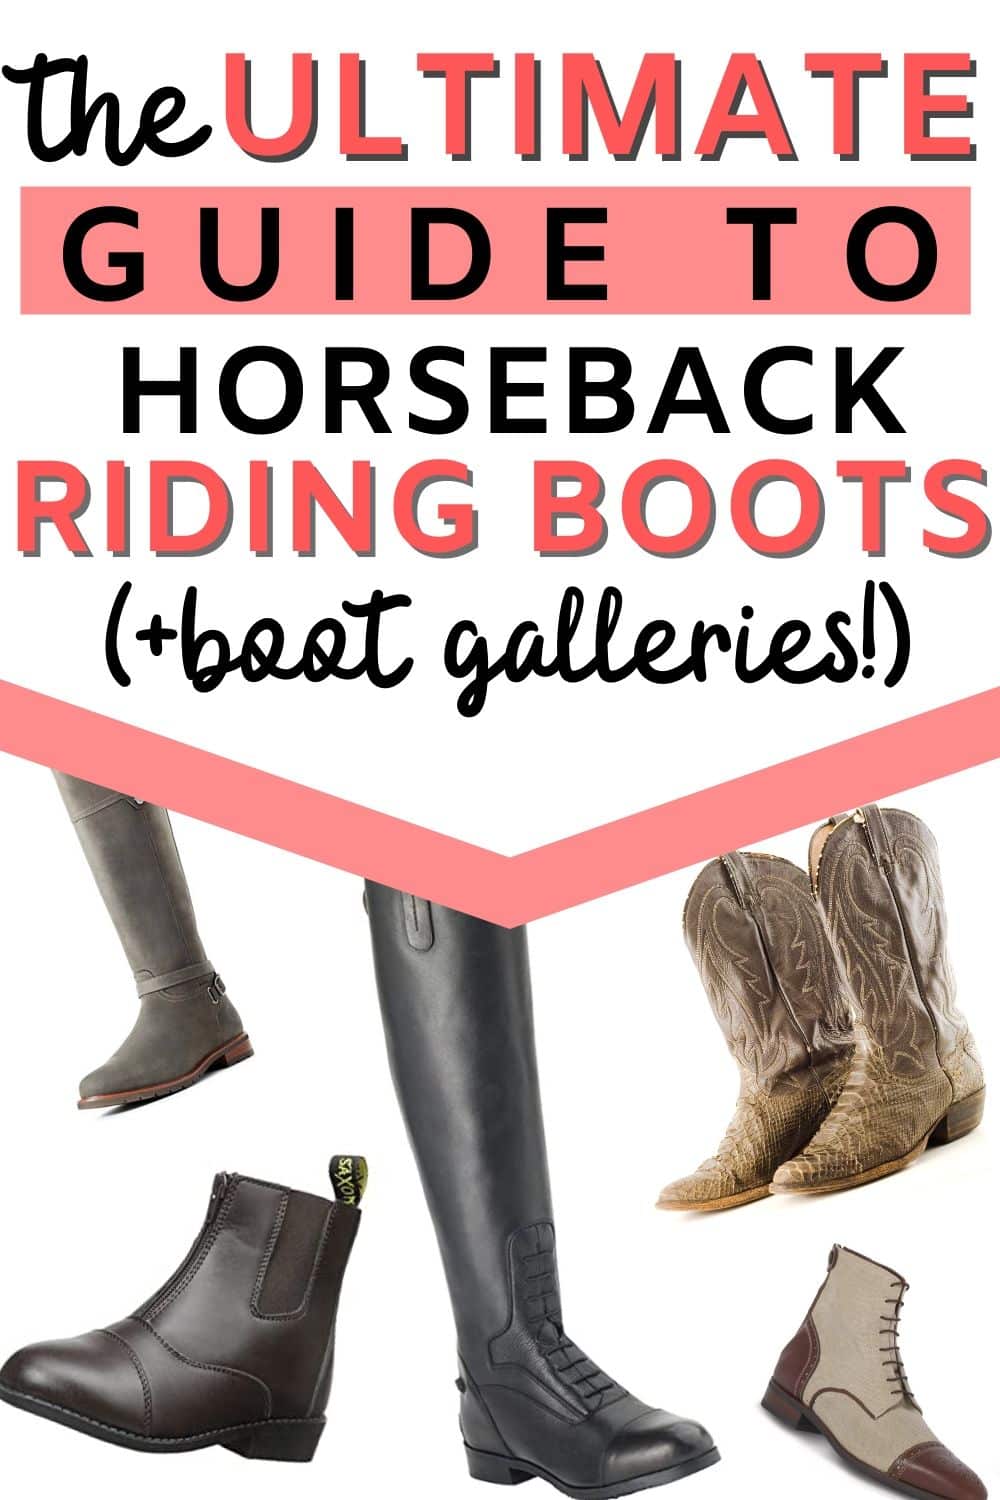 The Ultimate Guide to Horse Riding Boots - Find Out What You Need